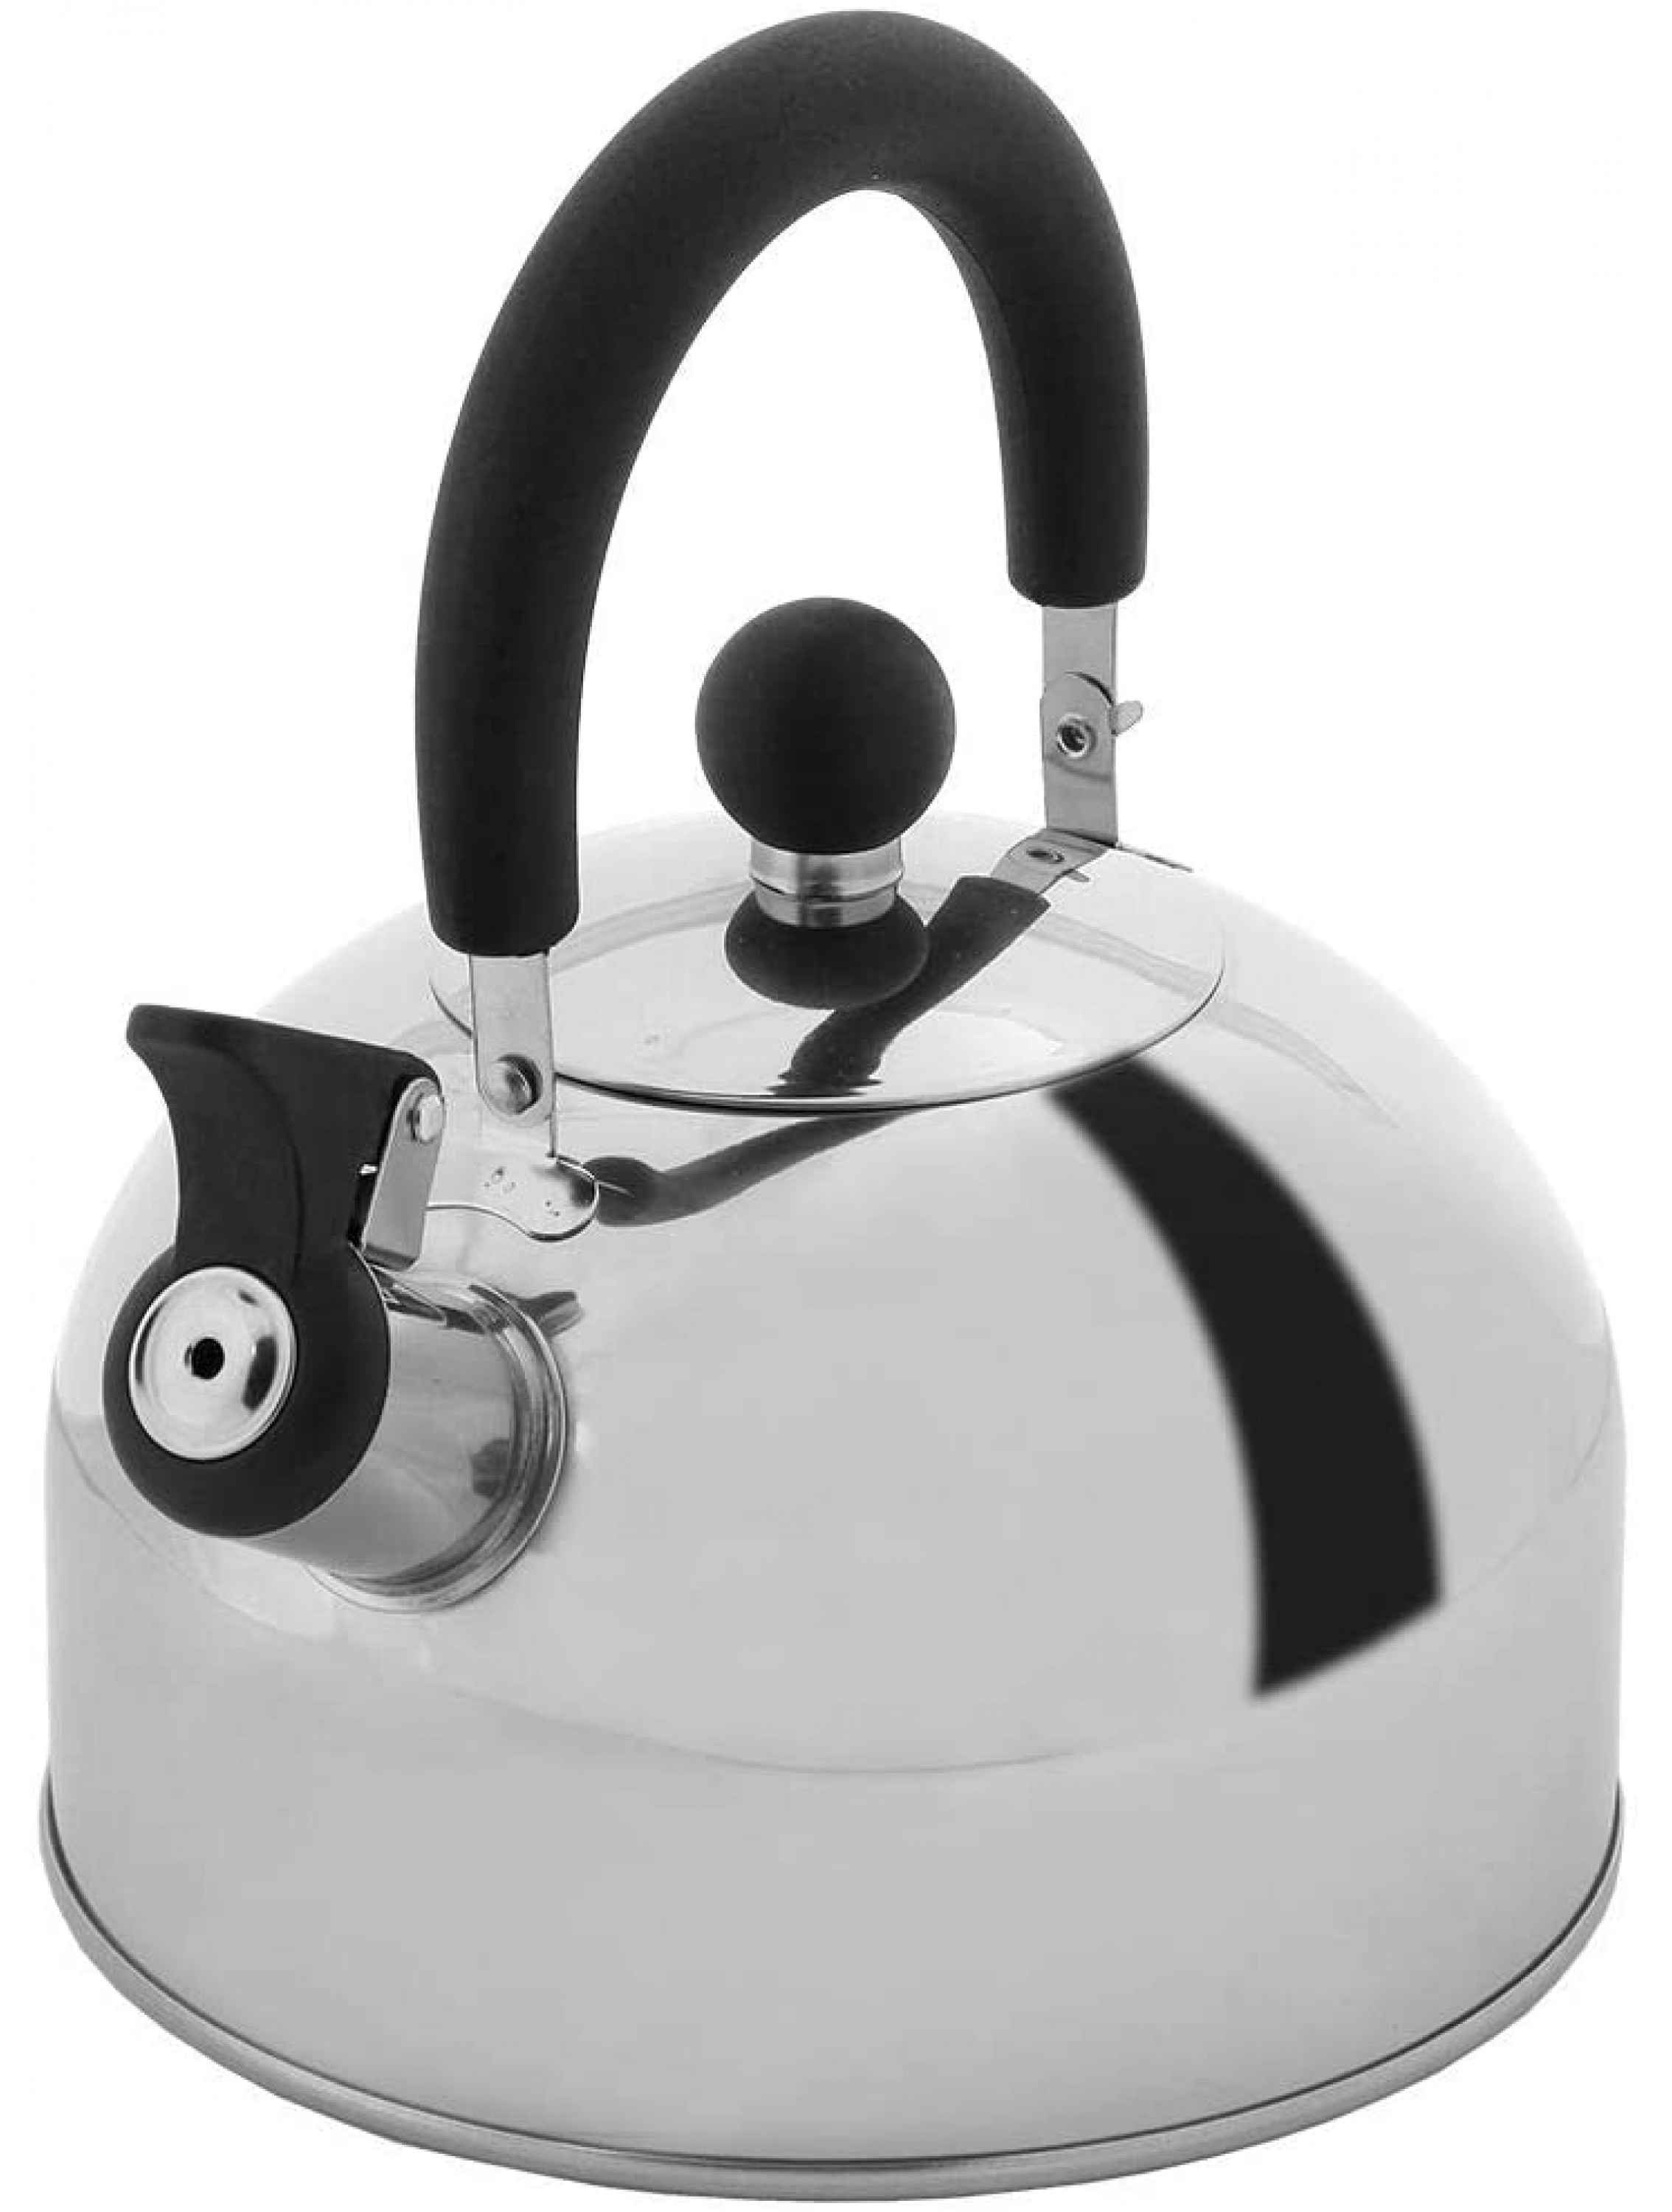 Lily's Home 2 Quart Stainless Steel Whistling Tea Kettle the Perfect Stovetop Tea and Water Boilers for Your Home Dorm Condo or Apartment. - BVT6D09QL